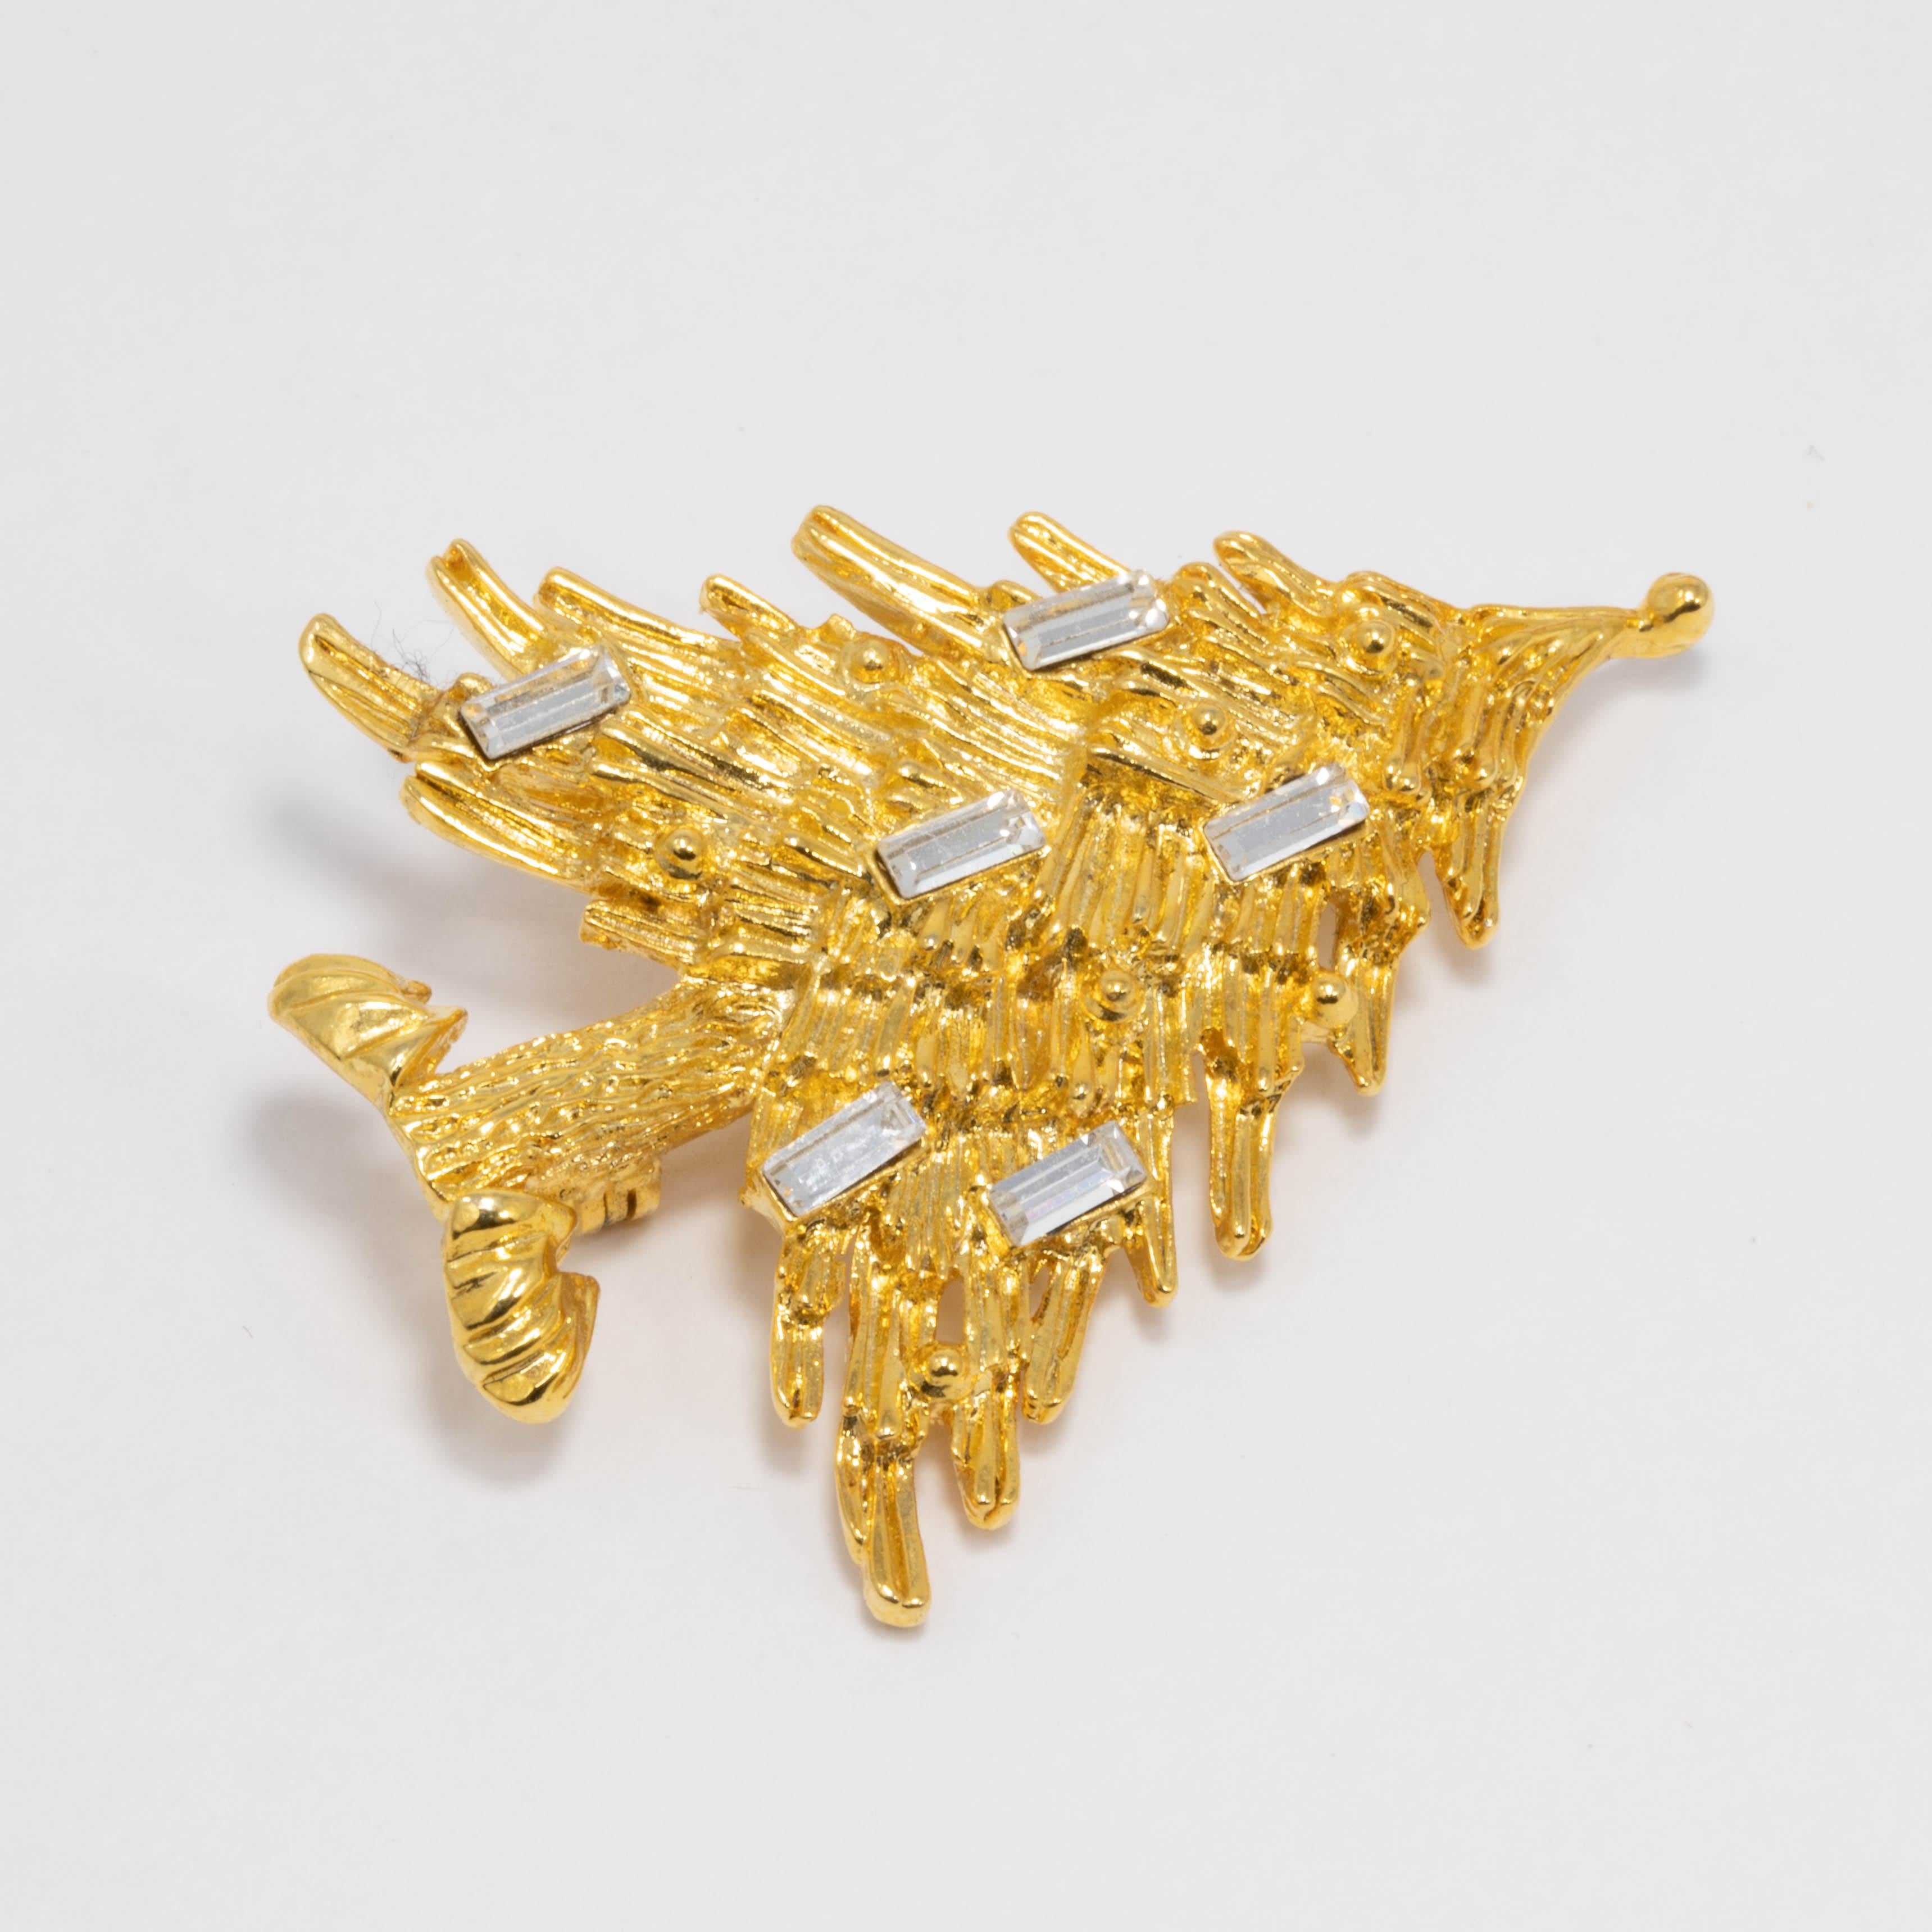 Festive Christmas tree pin brooch, featuring a textured golden evergreen fir tree decorated with baguette-cut clear crystals.

Gold plated.

Tags, Marks, Hallmarks: © LIA, Made in USA